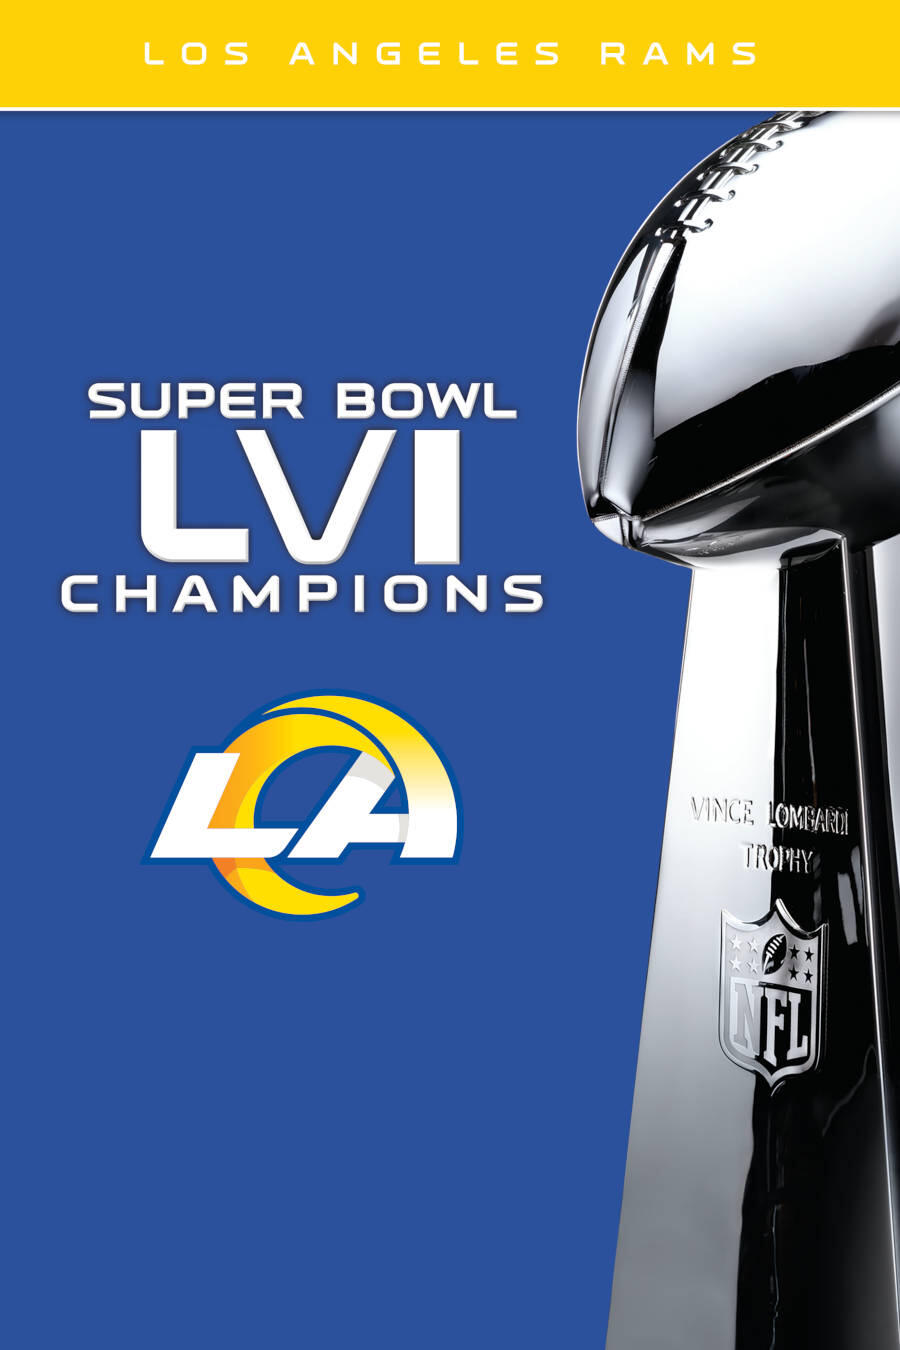 super bowl wins for rams